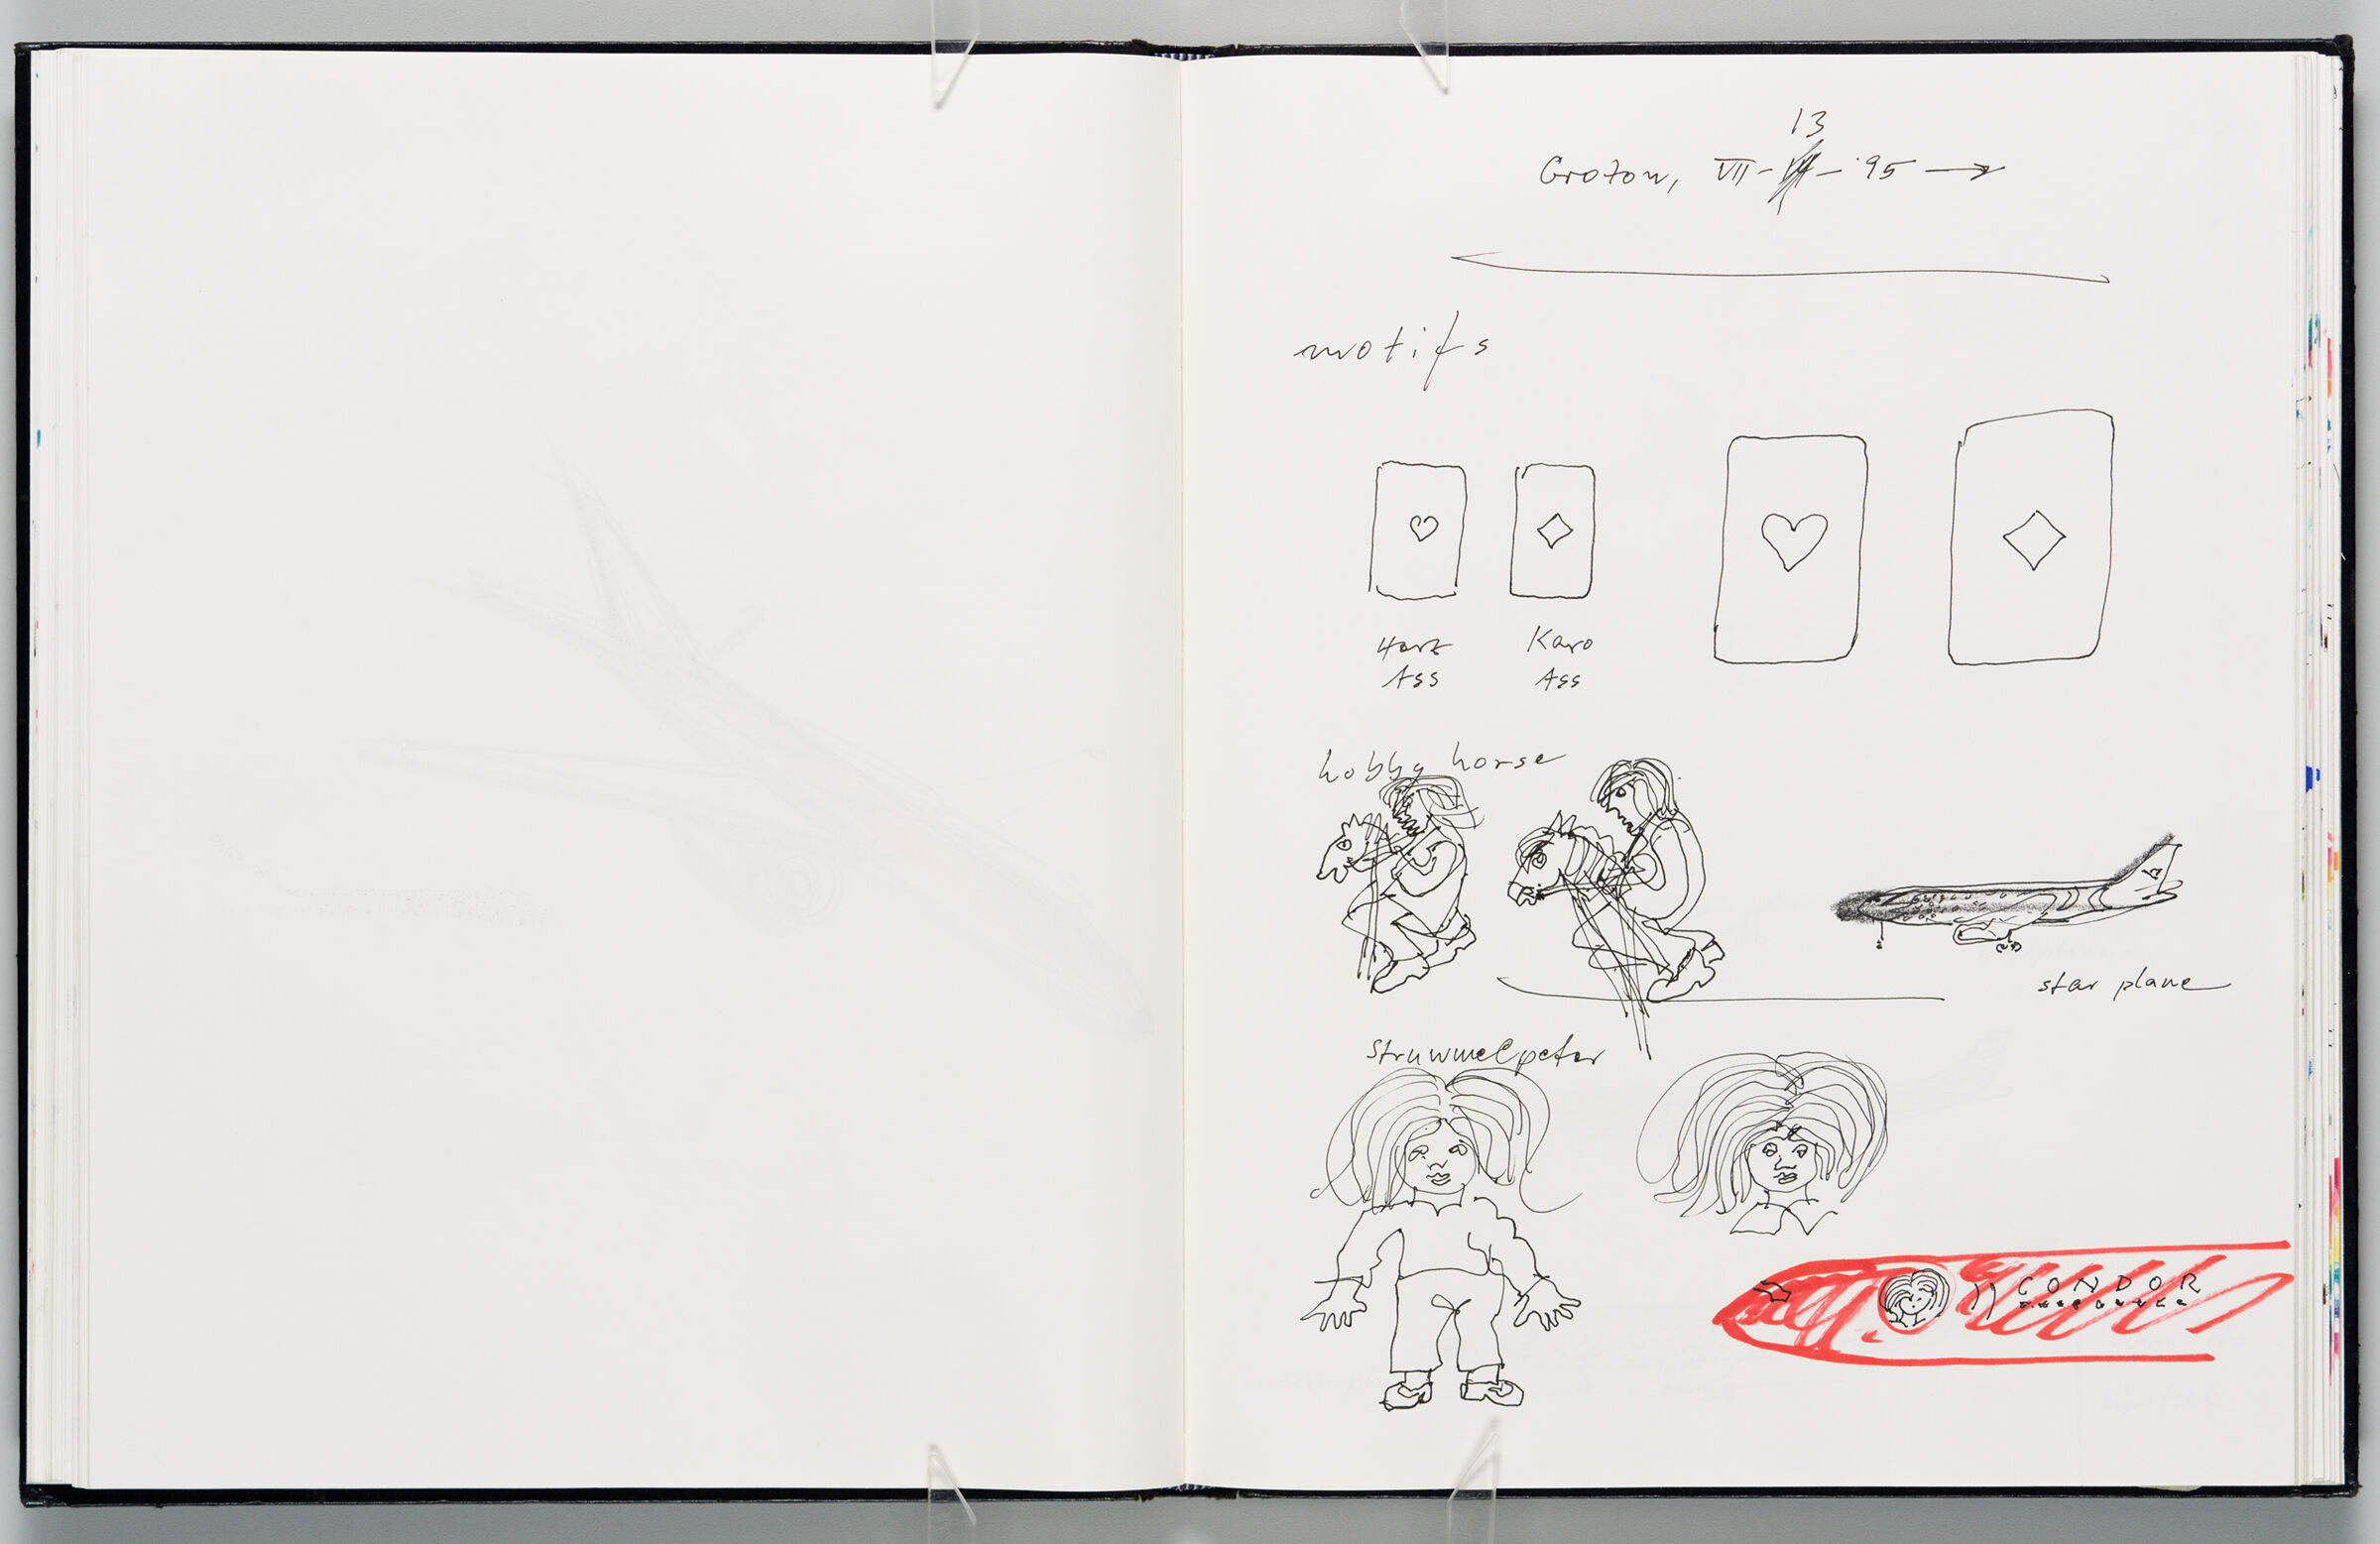 Untitled (Blank, Left Page); Untitled (Notes On Motifs For Condor Designs, Right Page)